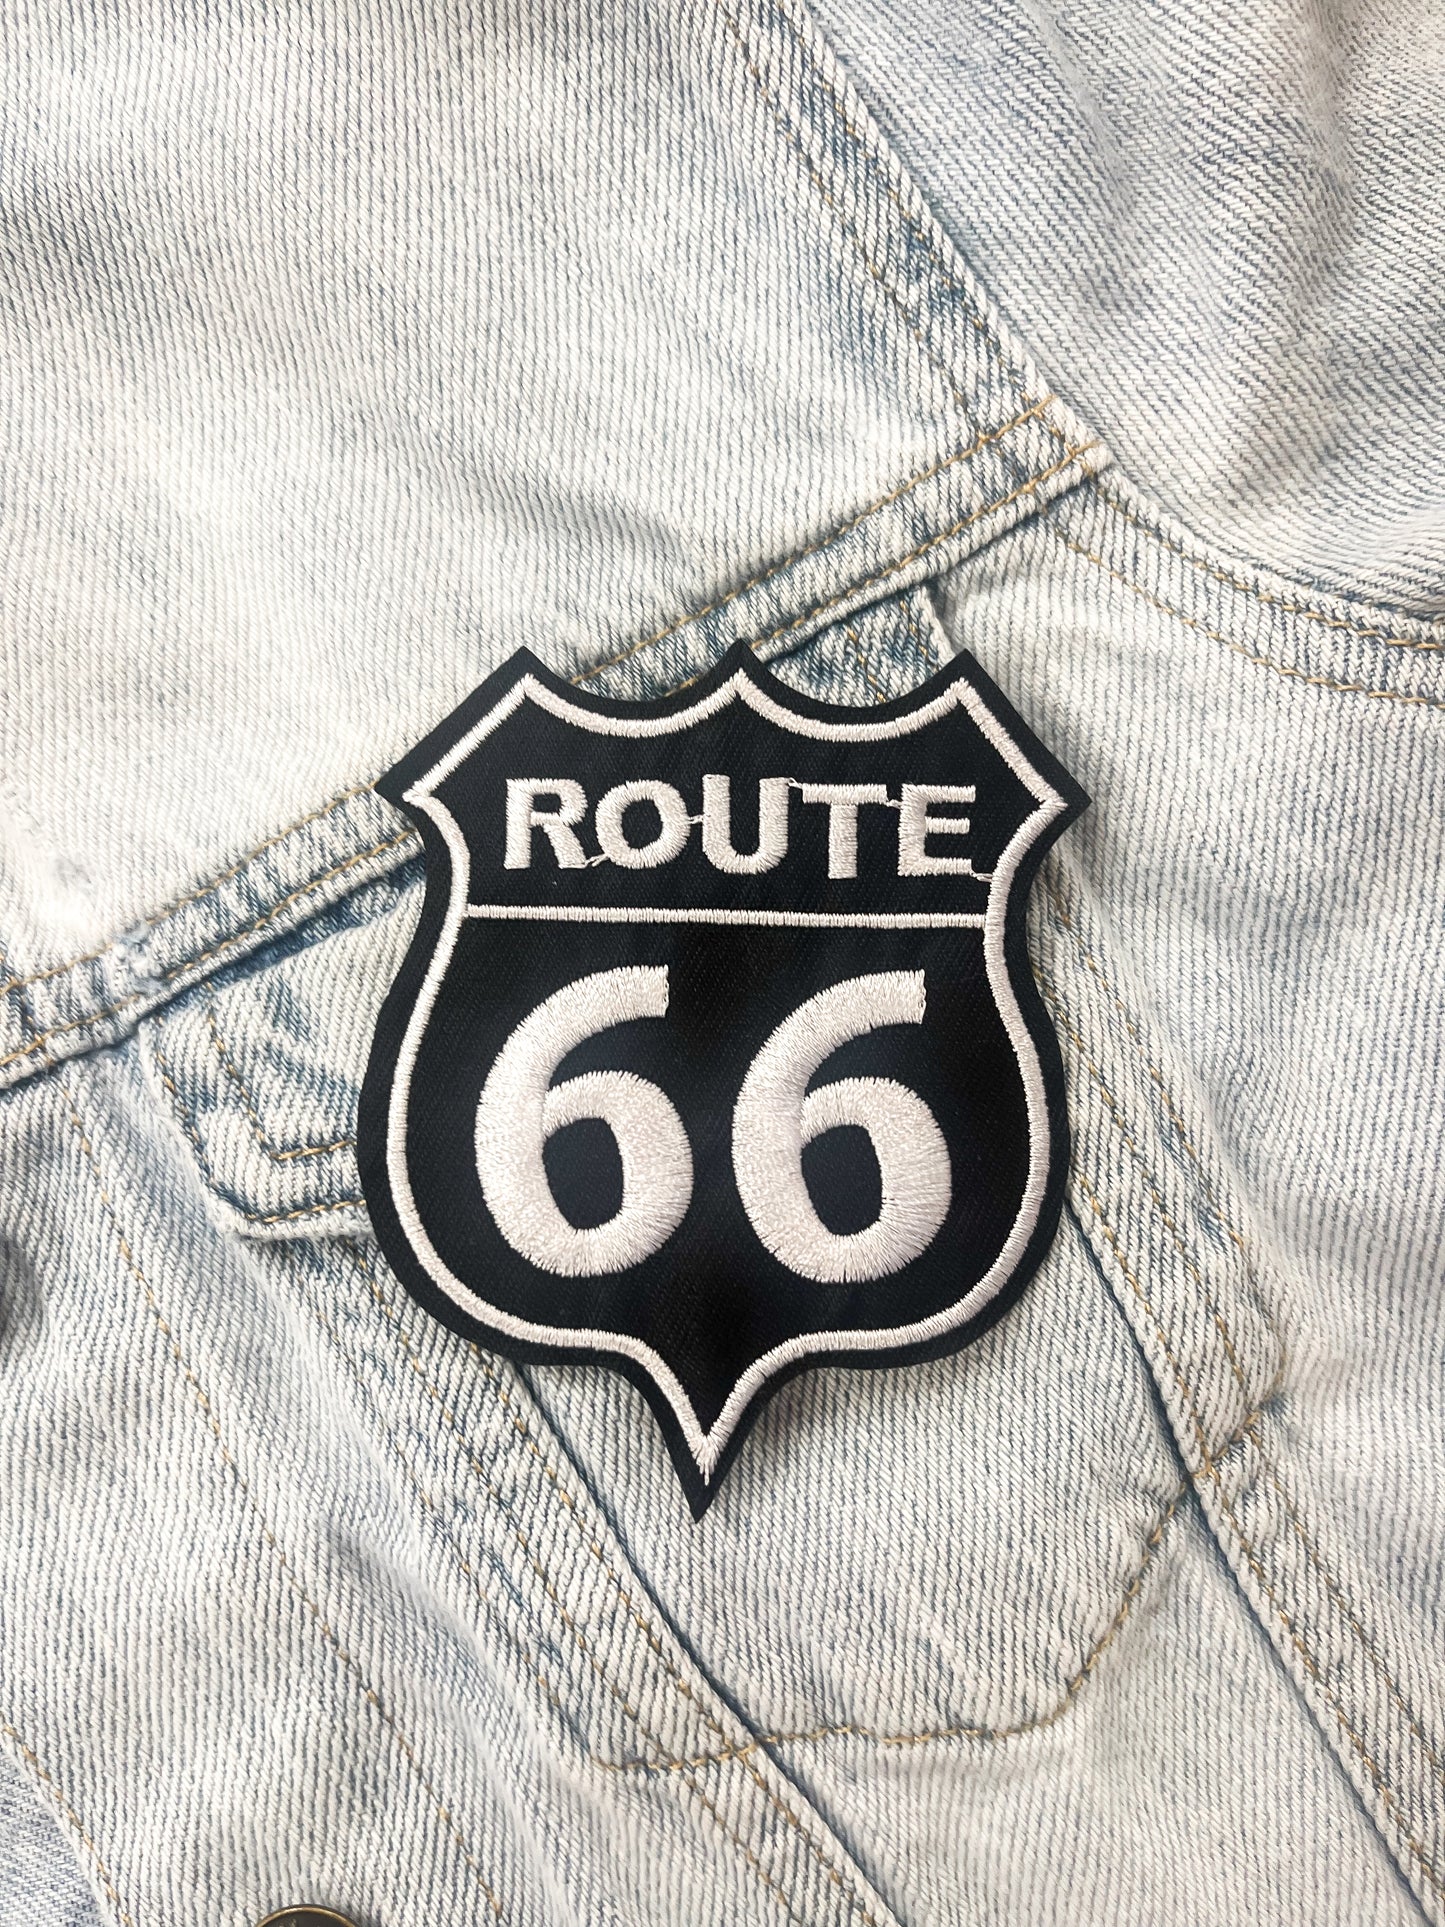 Route 66 patch